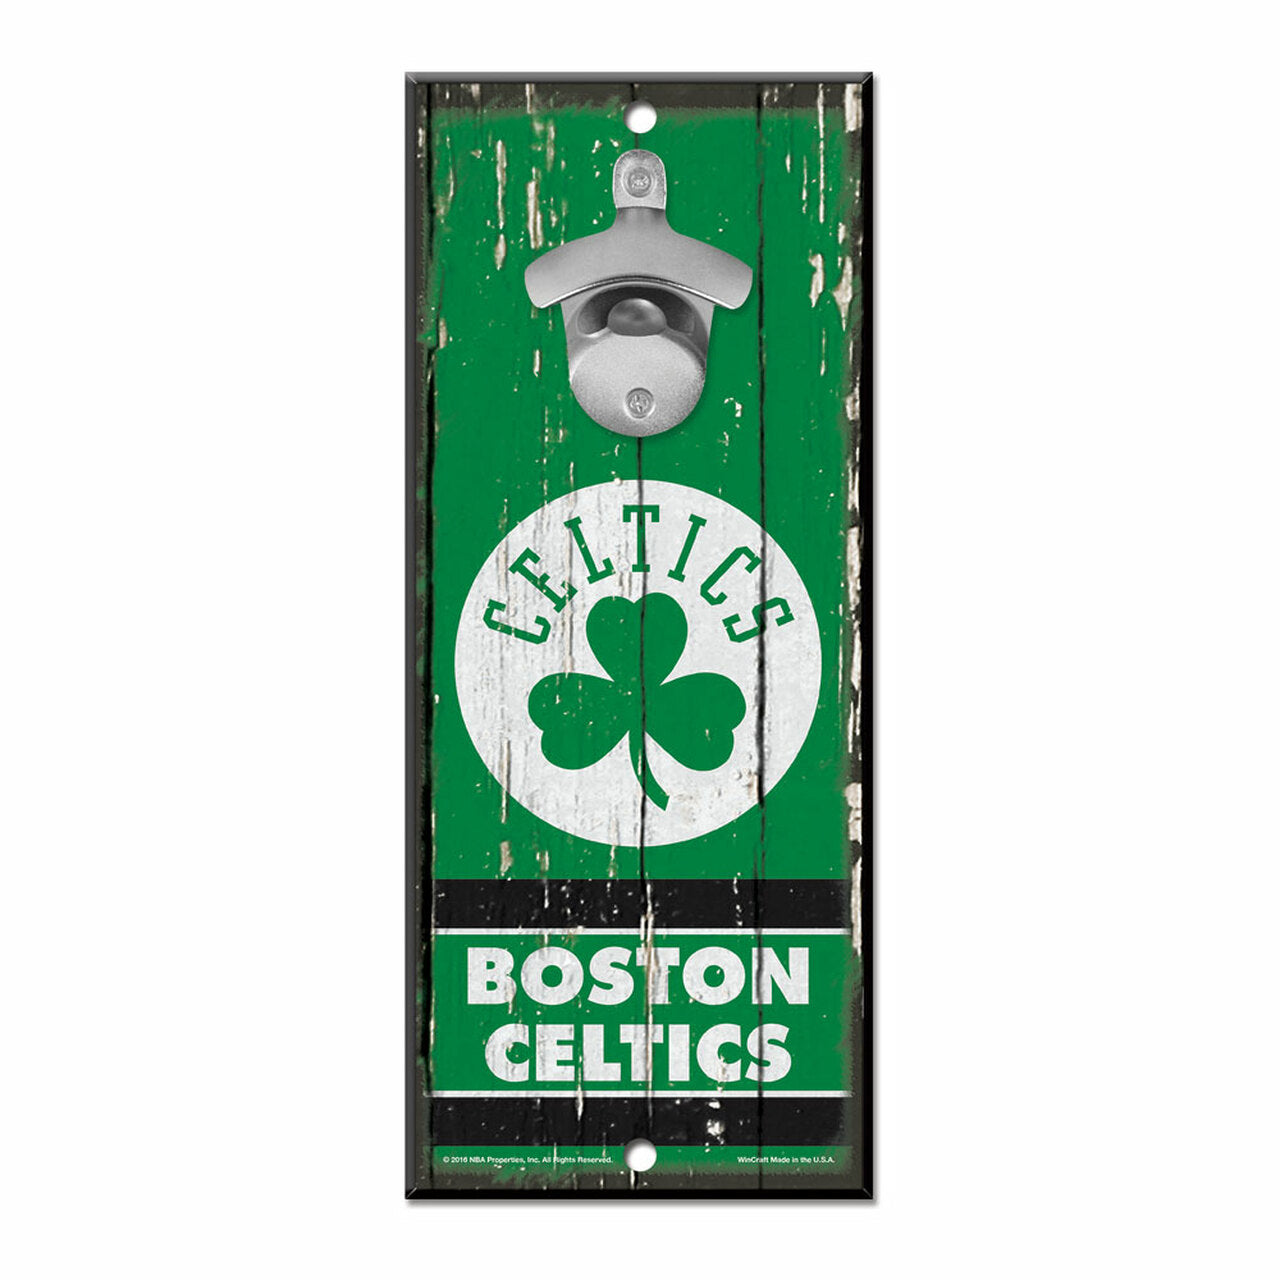 Boston Celtics NHL Bottle Opener Wood Sign - 5x11, 3/8" hardboard, team graphics, metal opener. Officially licensed, made in USA by Wincraft